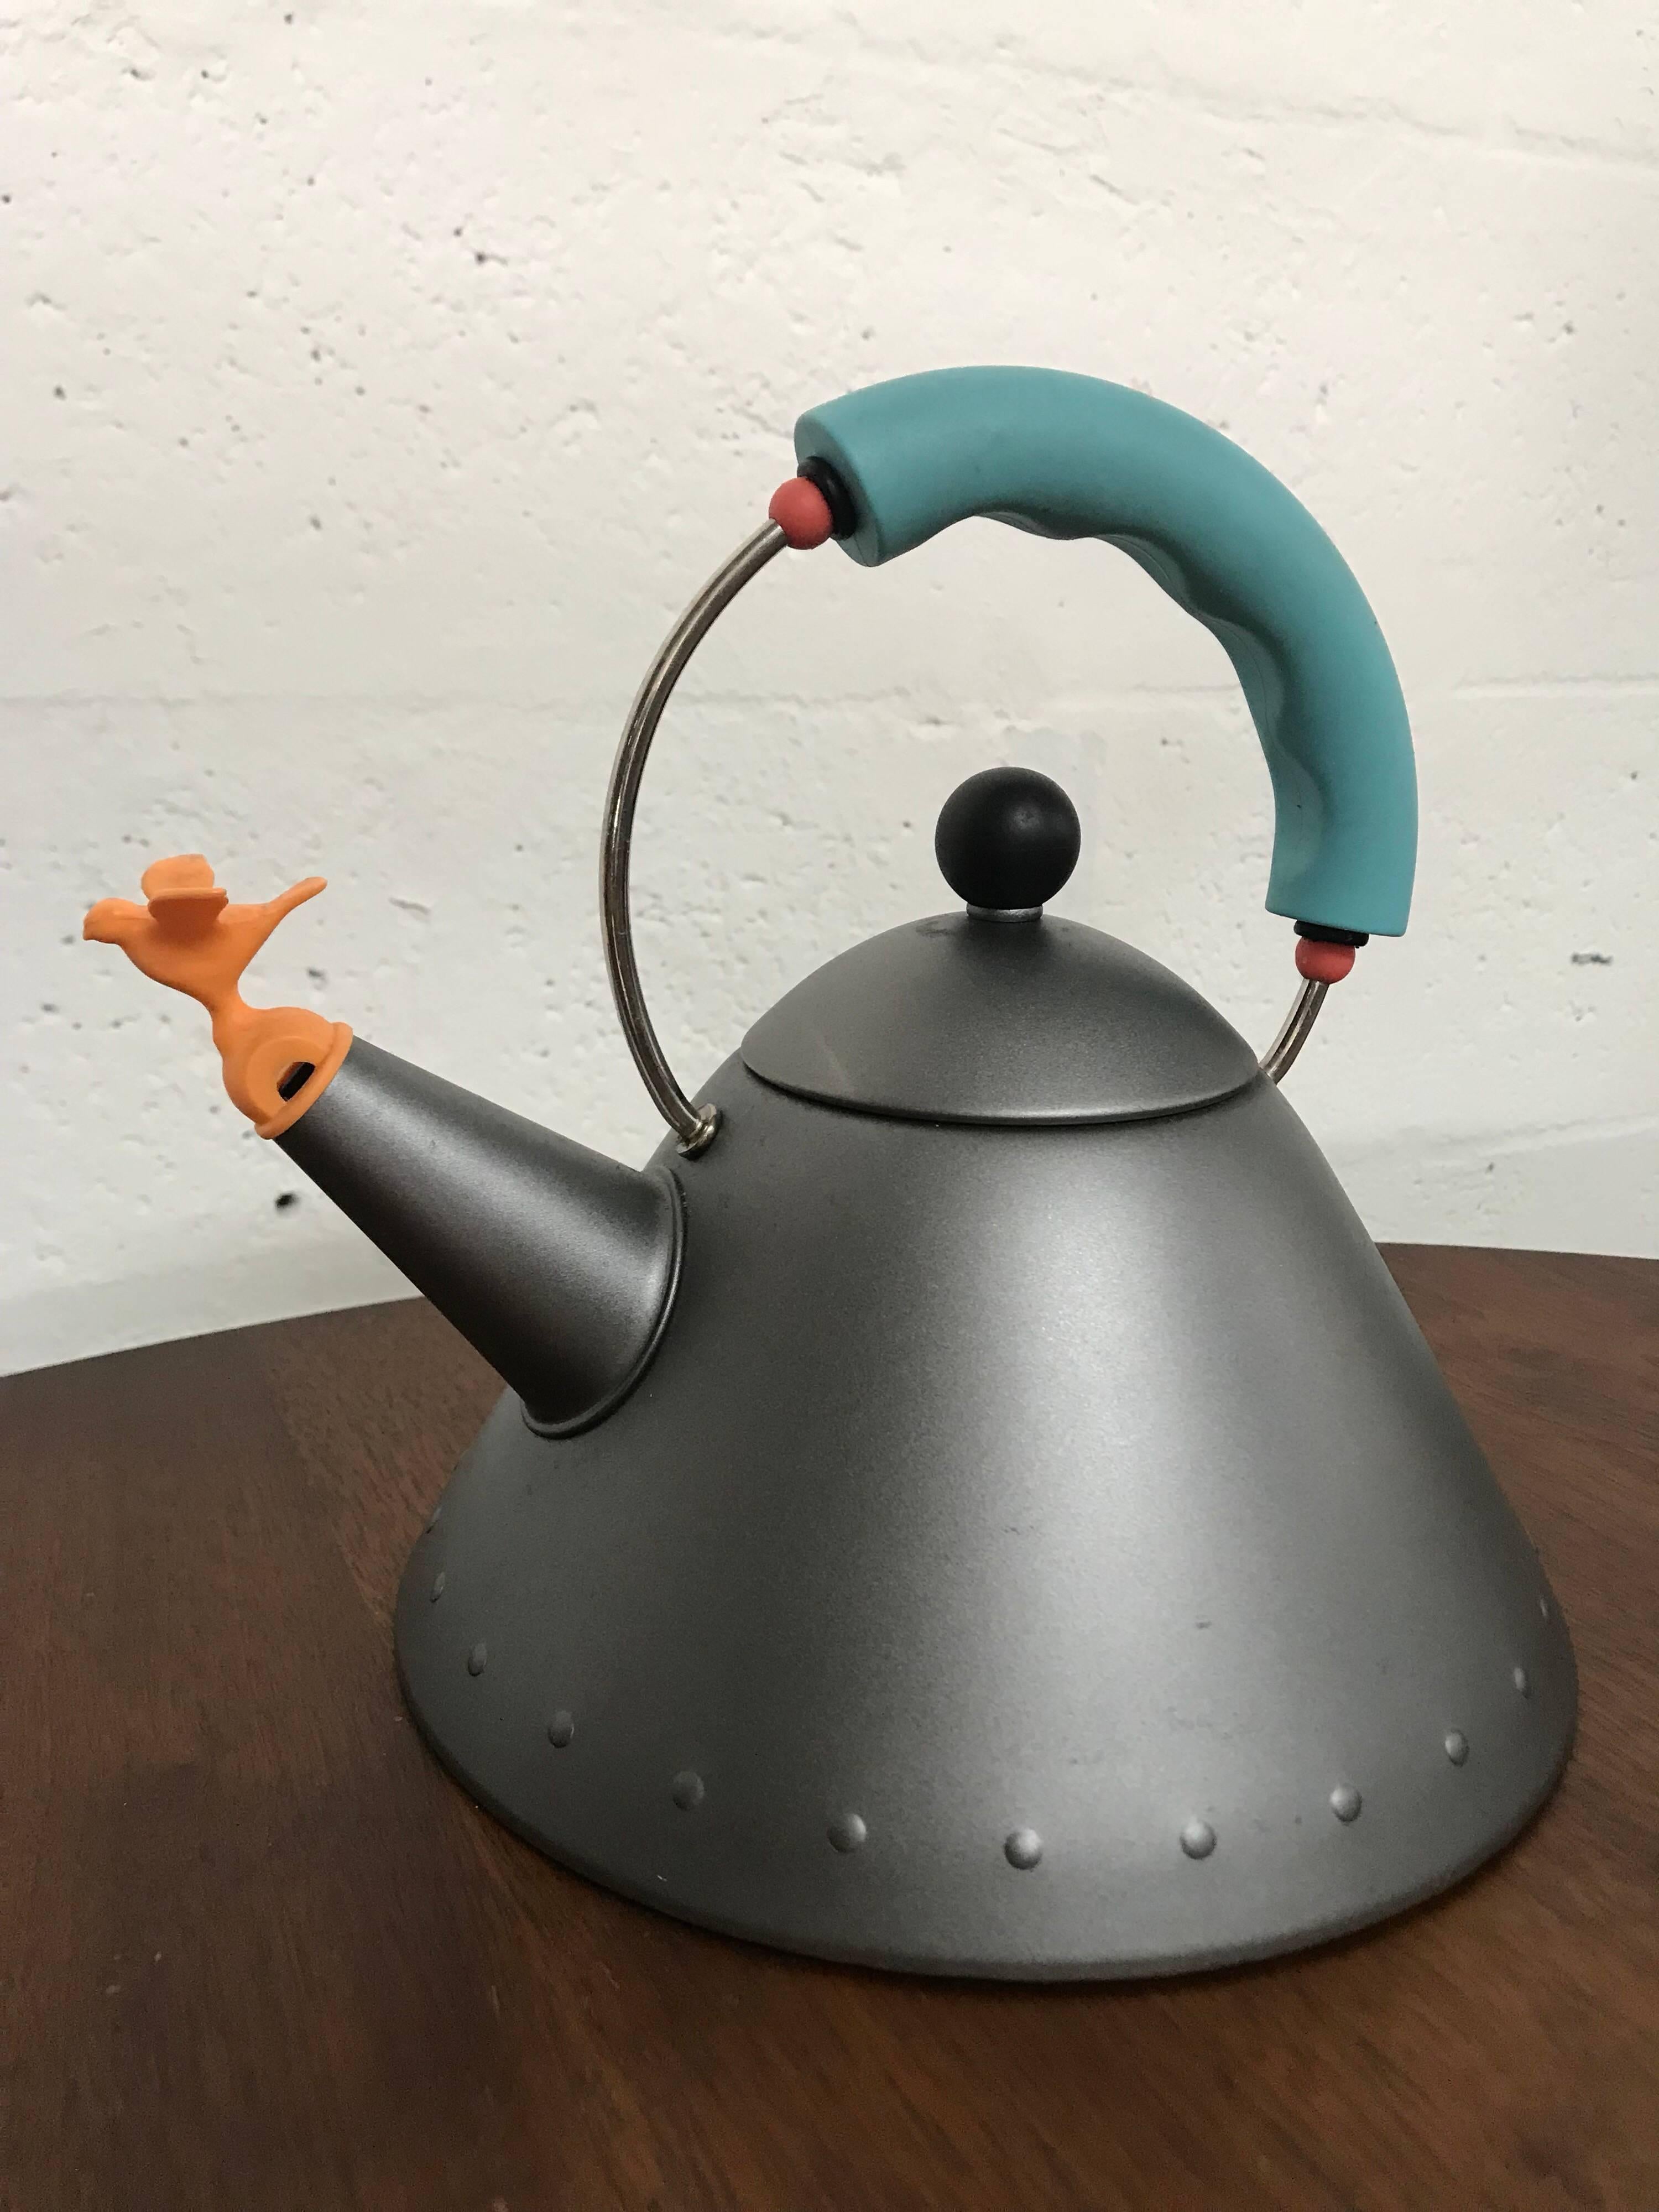 Michael Graves Postmodern tea kettle for Alessi rendered in matte platinum grey enamel body, black knob, orange whistle bird and turquoise handle with red appointments.